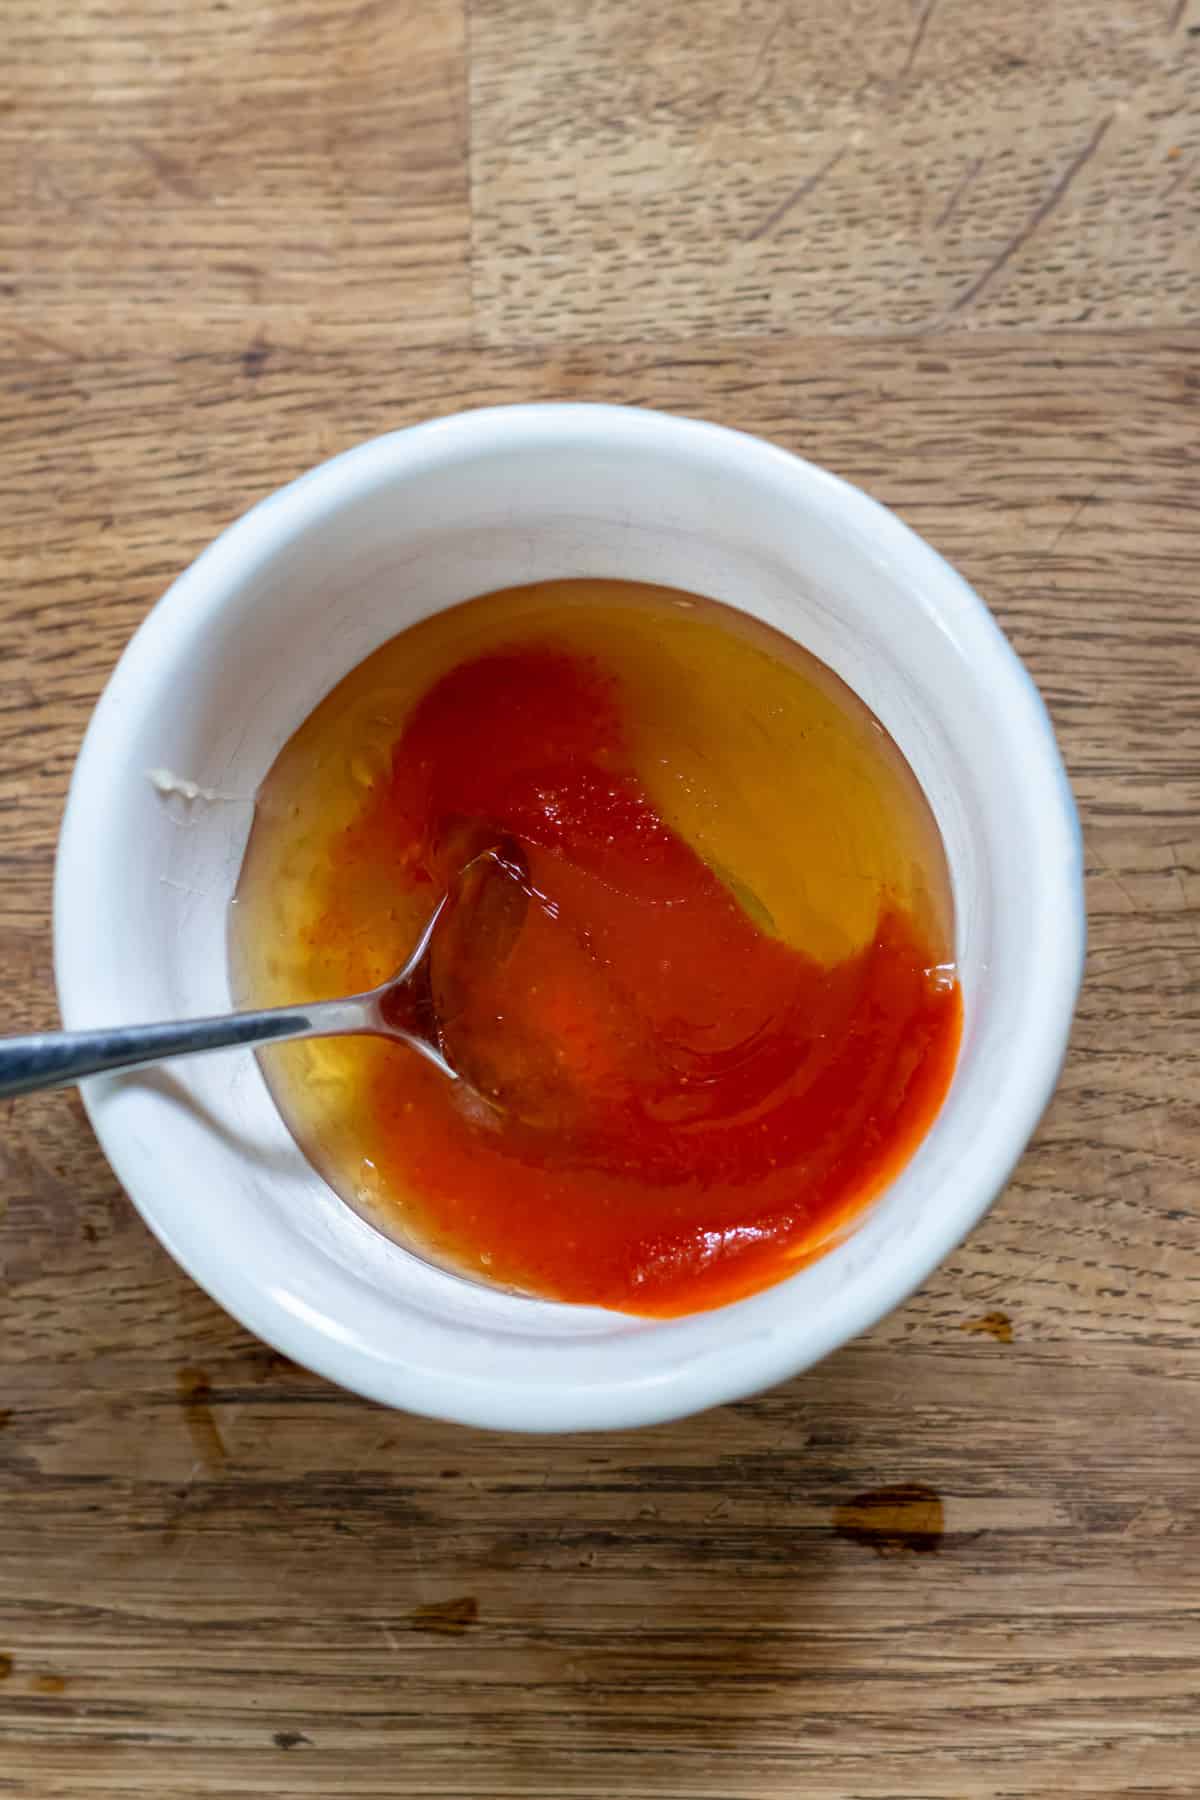 Mixing honey and sriracha in a bowl.